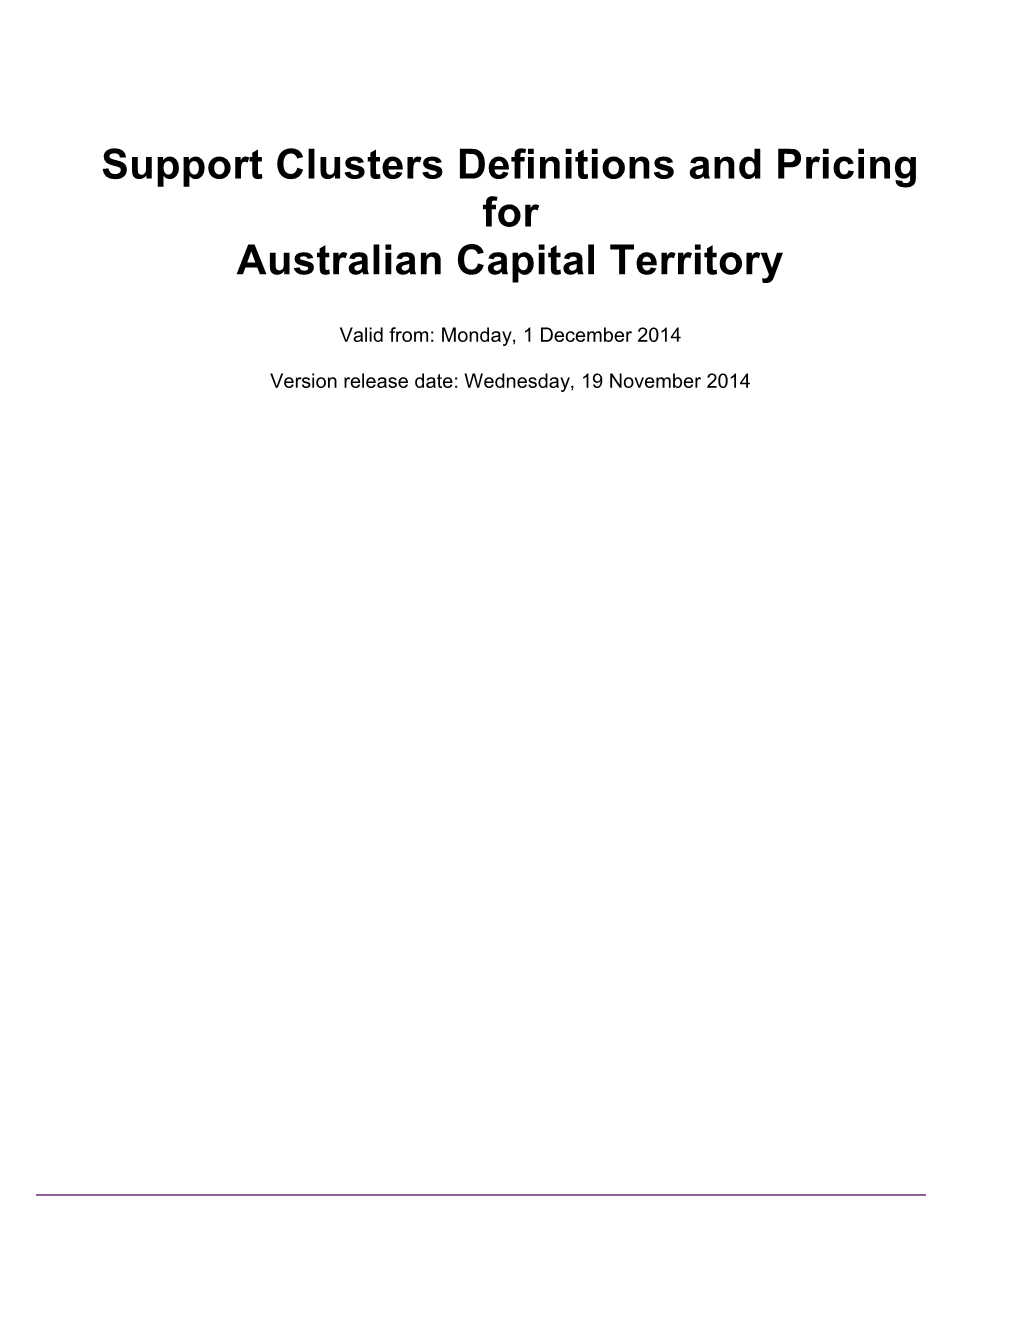 Support Clusters Definitions and Pricing for ACT